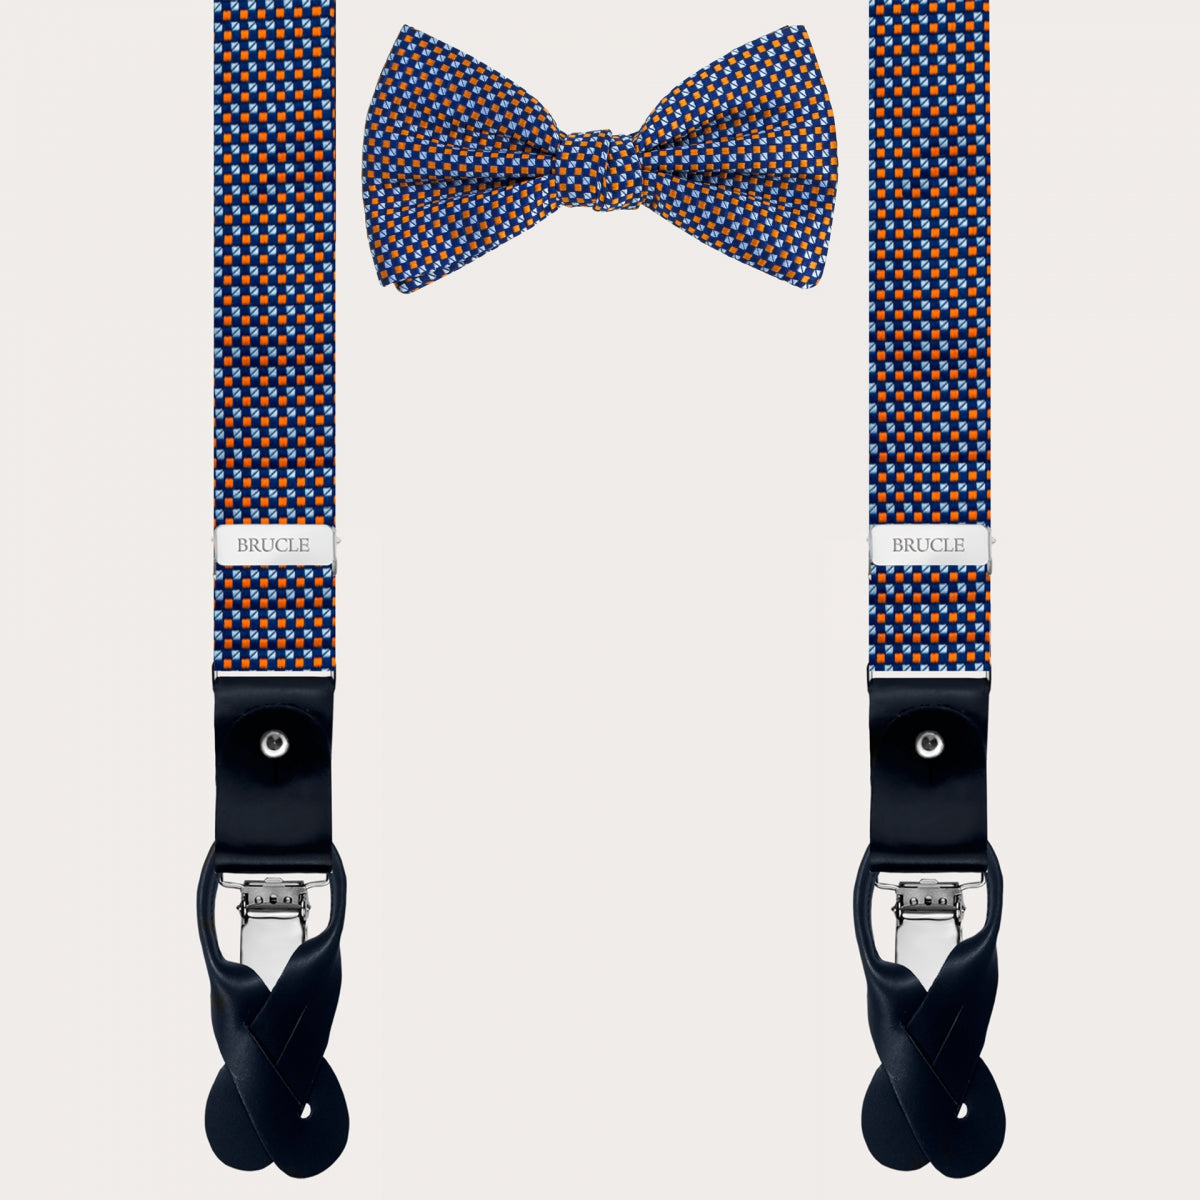 SUSPENDERS AND BOW TIE COORDINATED IN SILK, BLUE AND ORANGE PATTERN